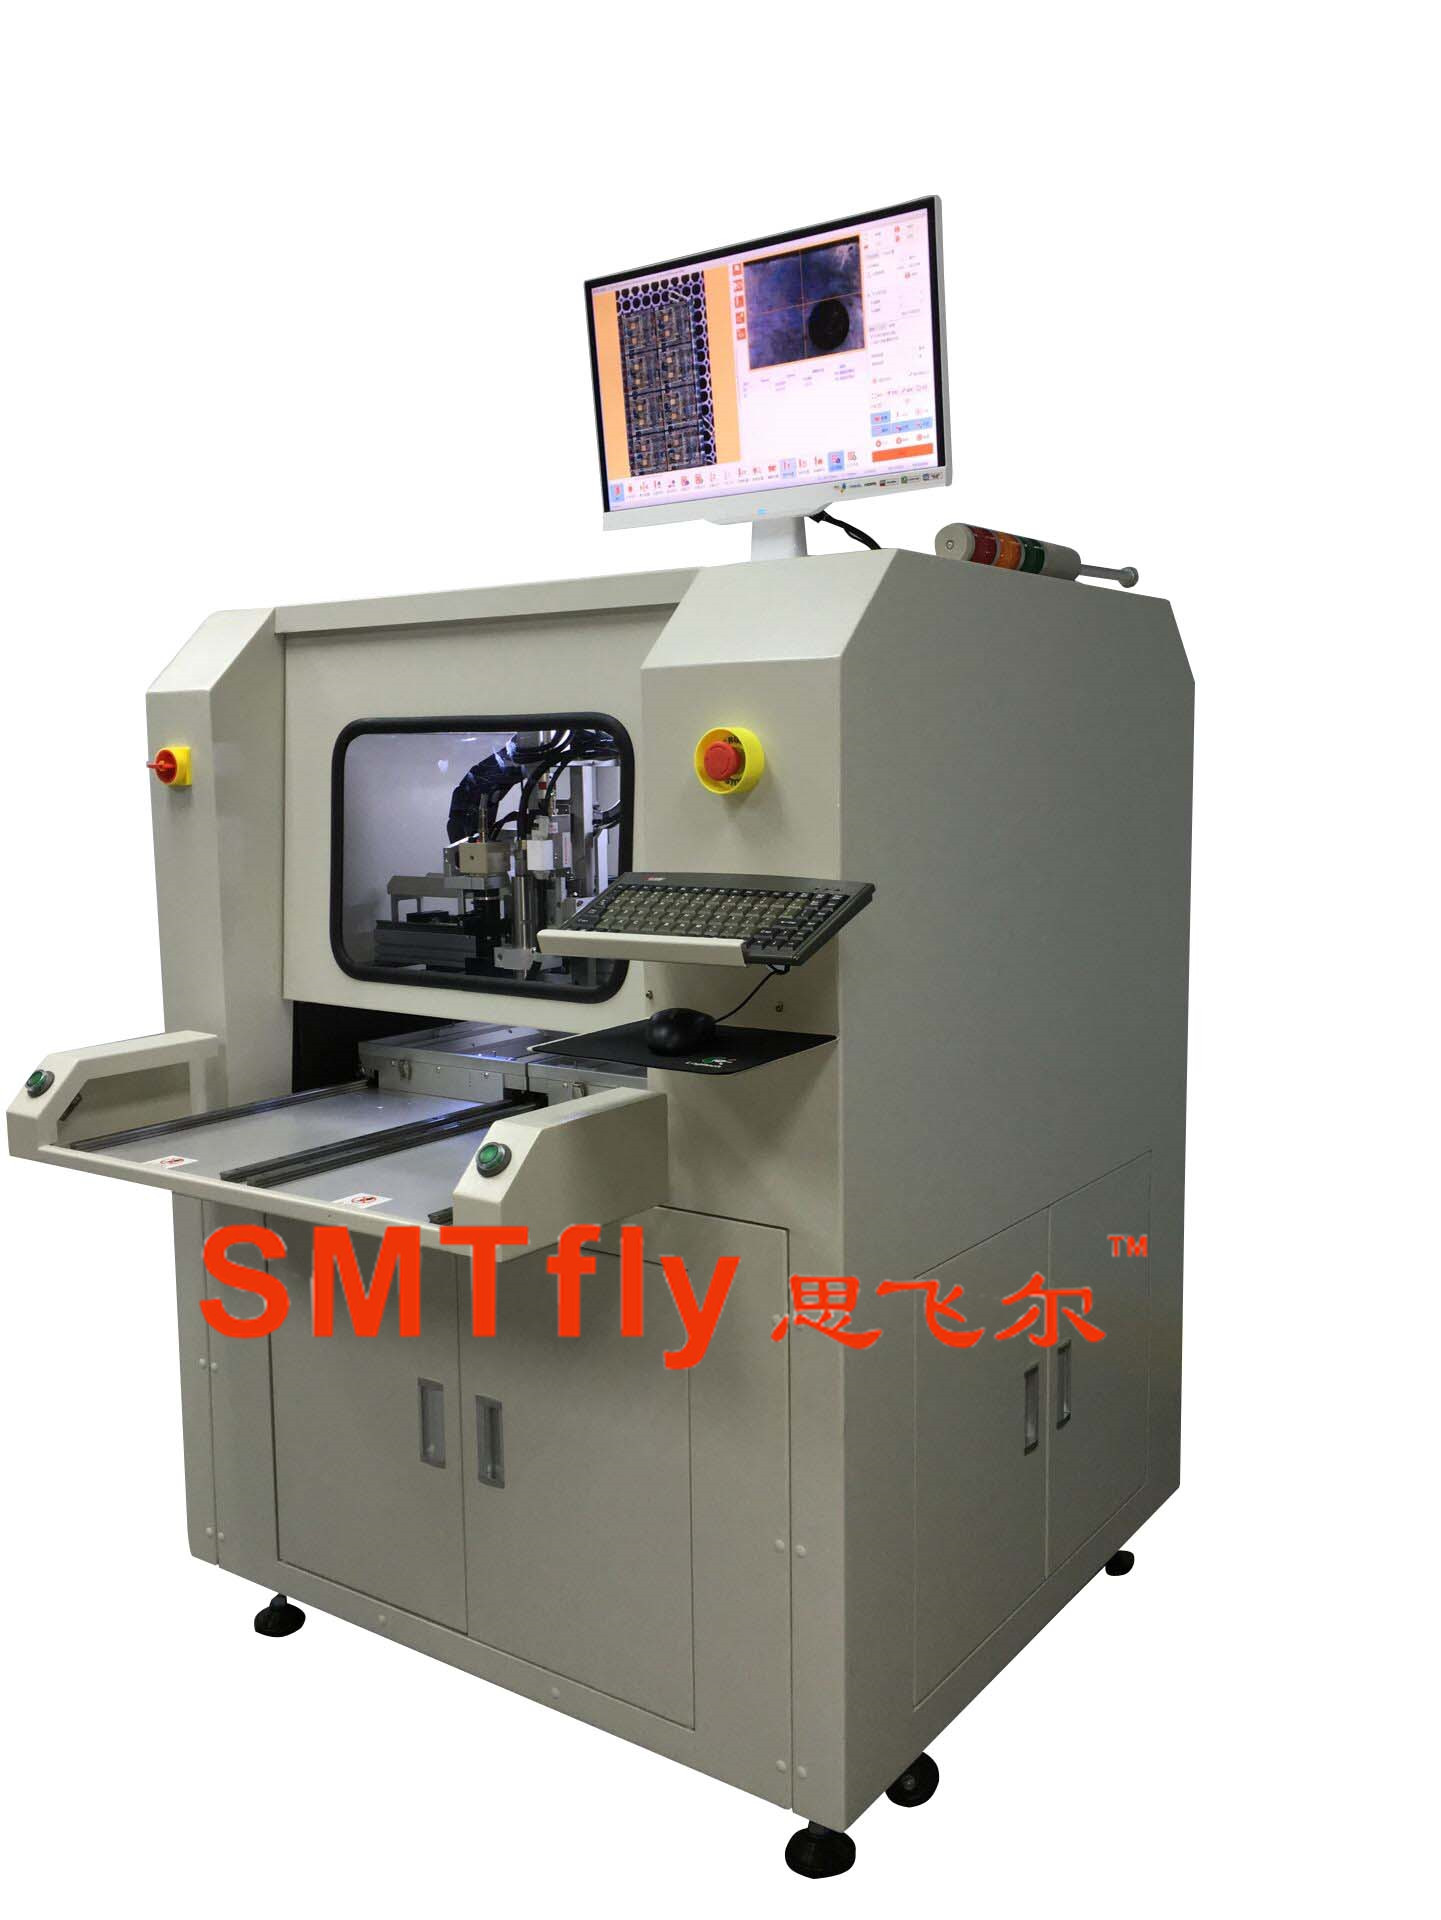 CNC Router for PCB,SMTfly-F02